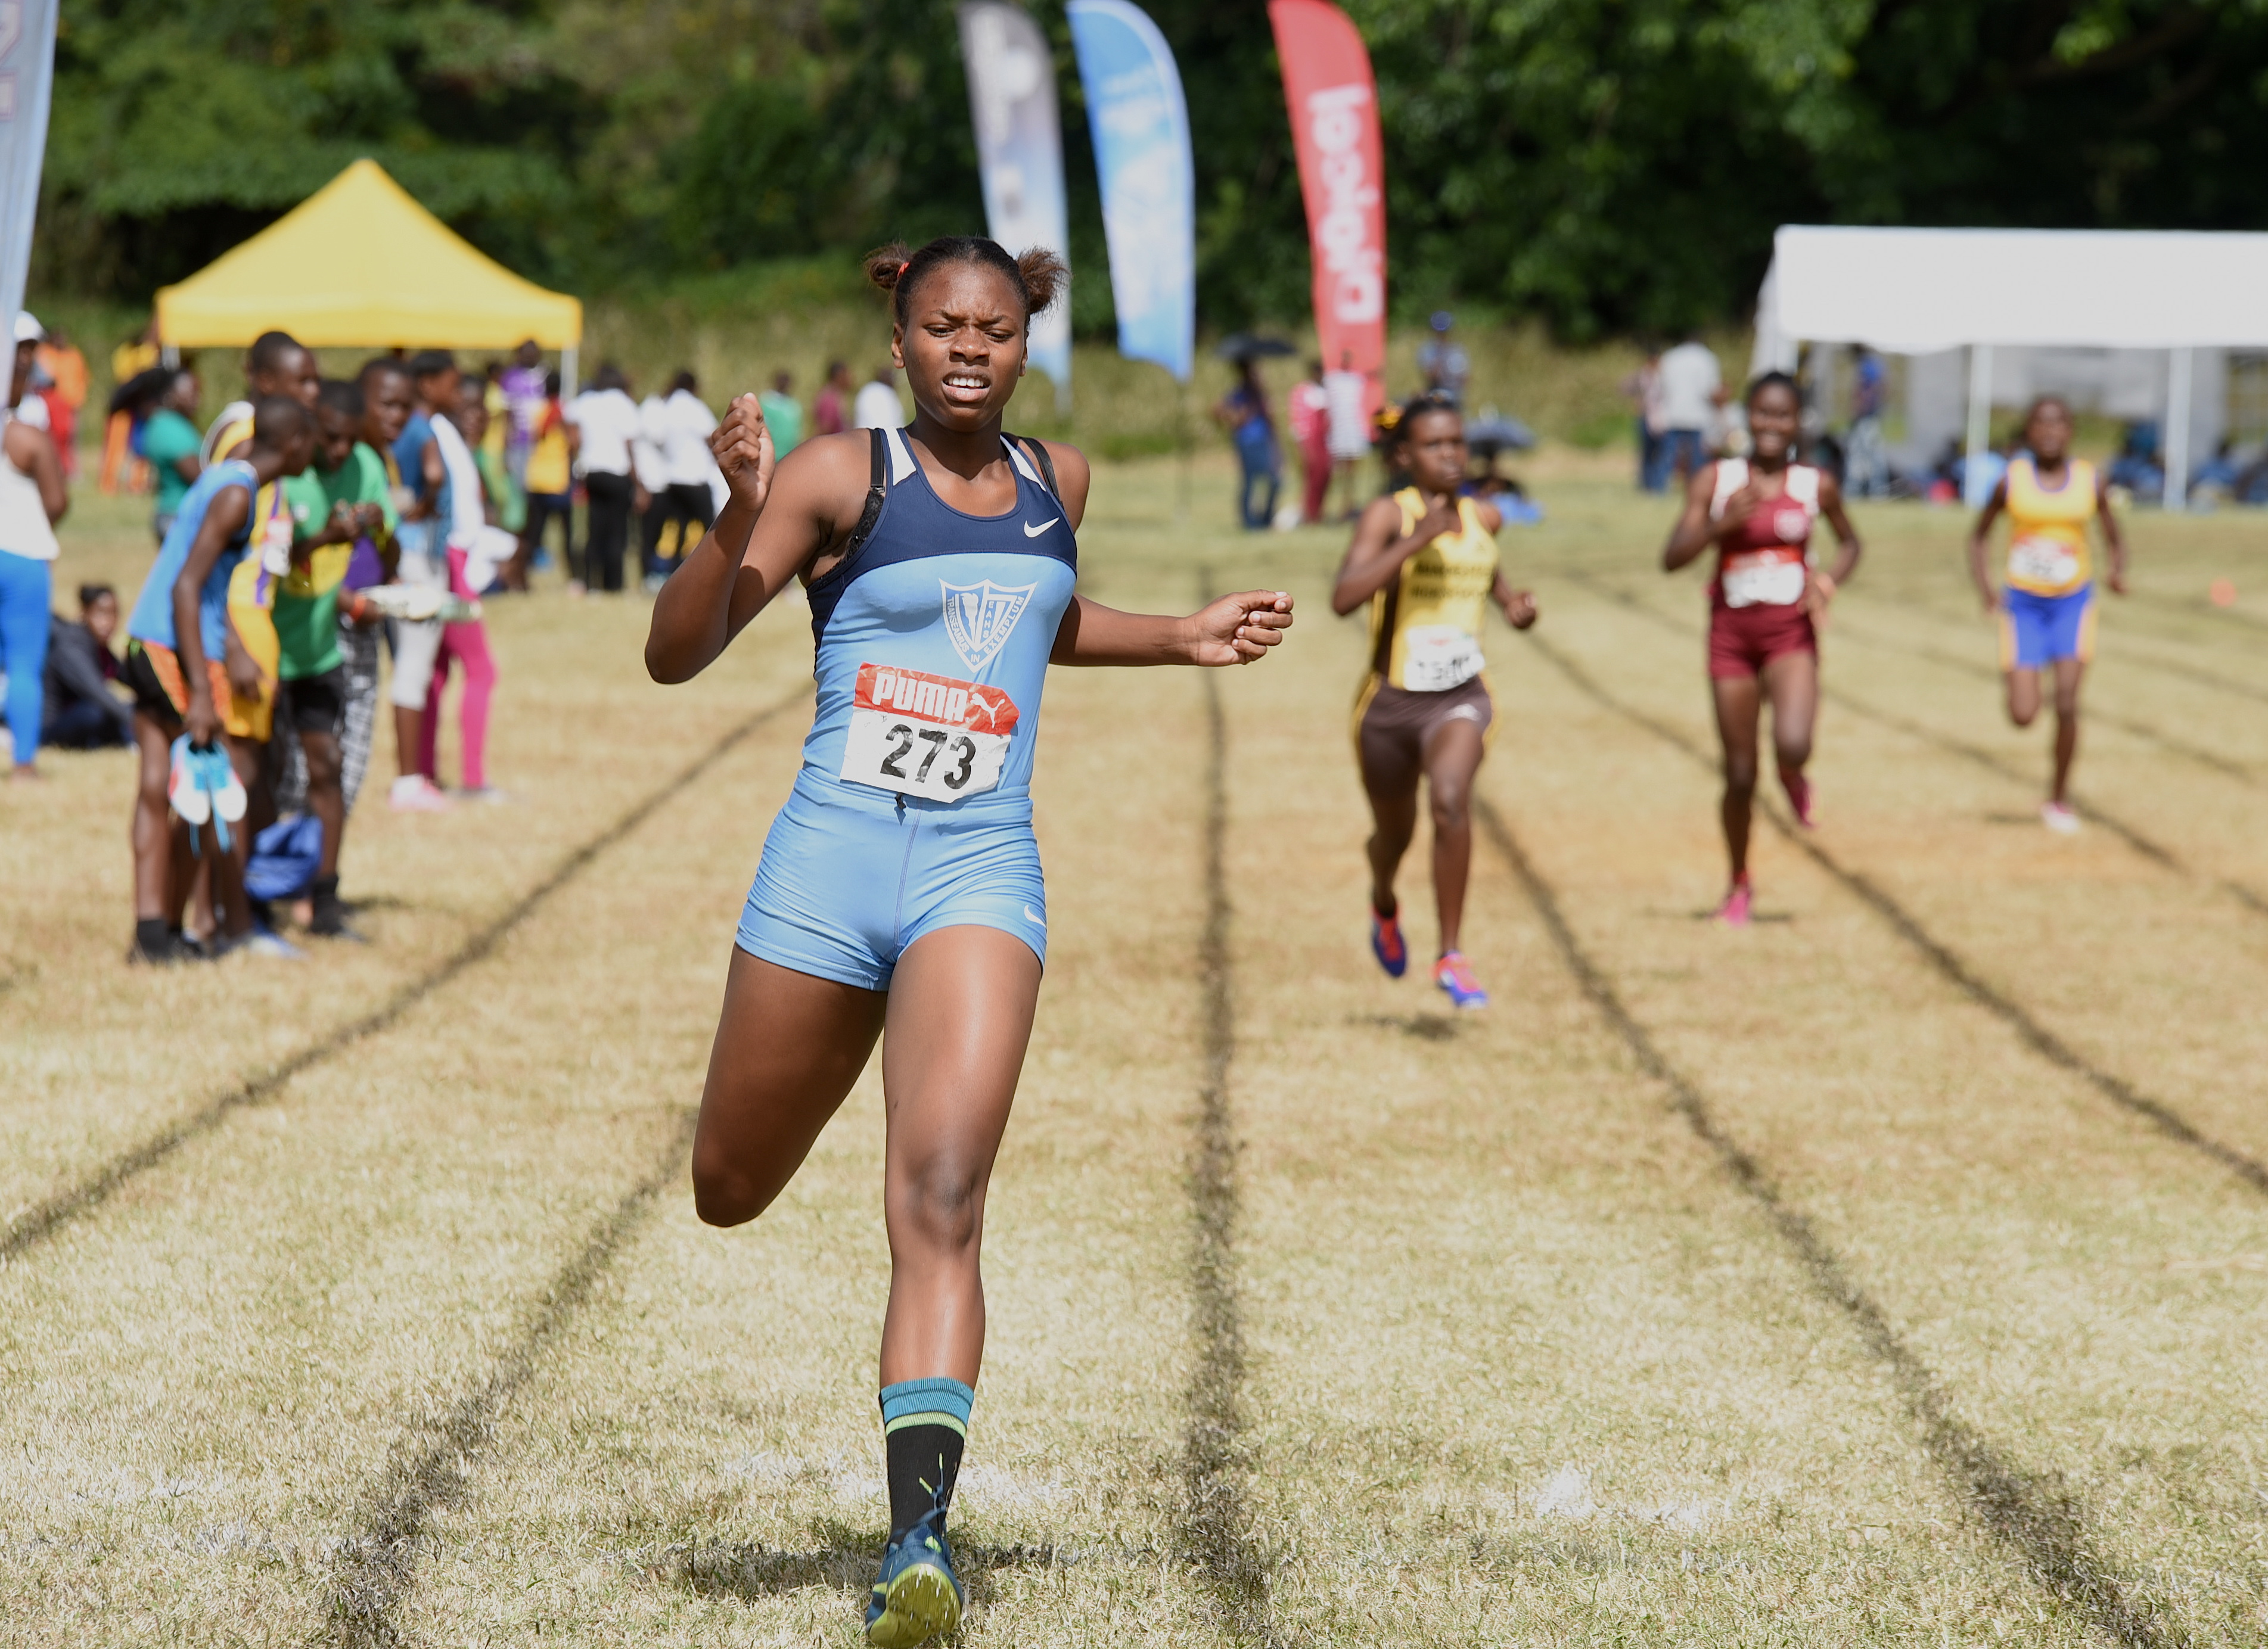 Results | STETHS Invitational | January 2020